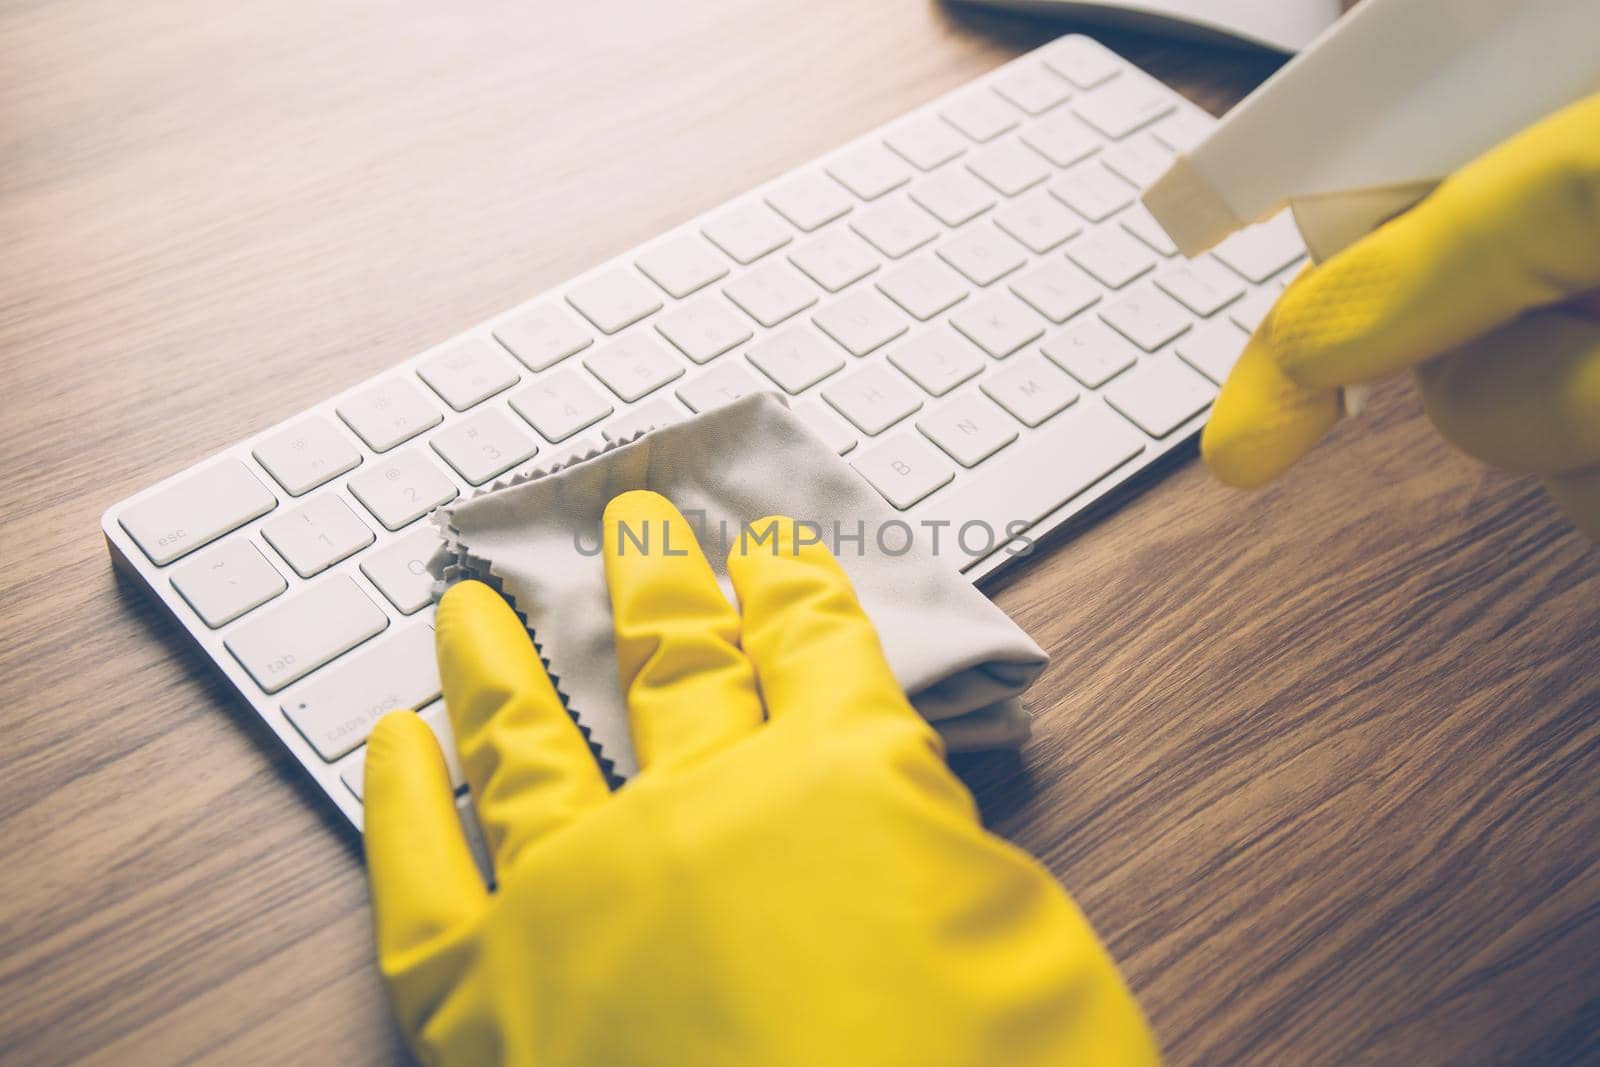 Hand of man cleaning keyboard computer with antibacterial for protect epidemic disease covid-19, fabric having antiseptic alcohol clean and wash laptop for on desk, business and health concept.